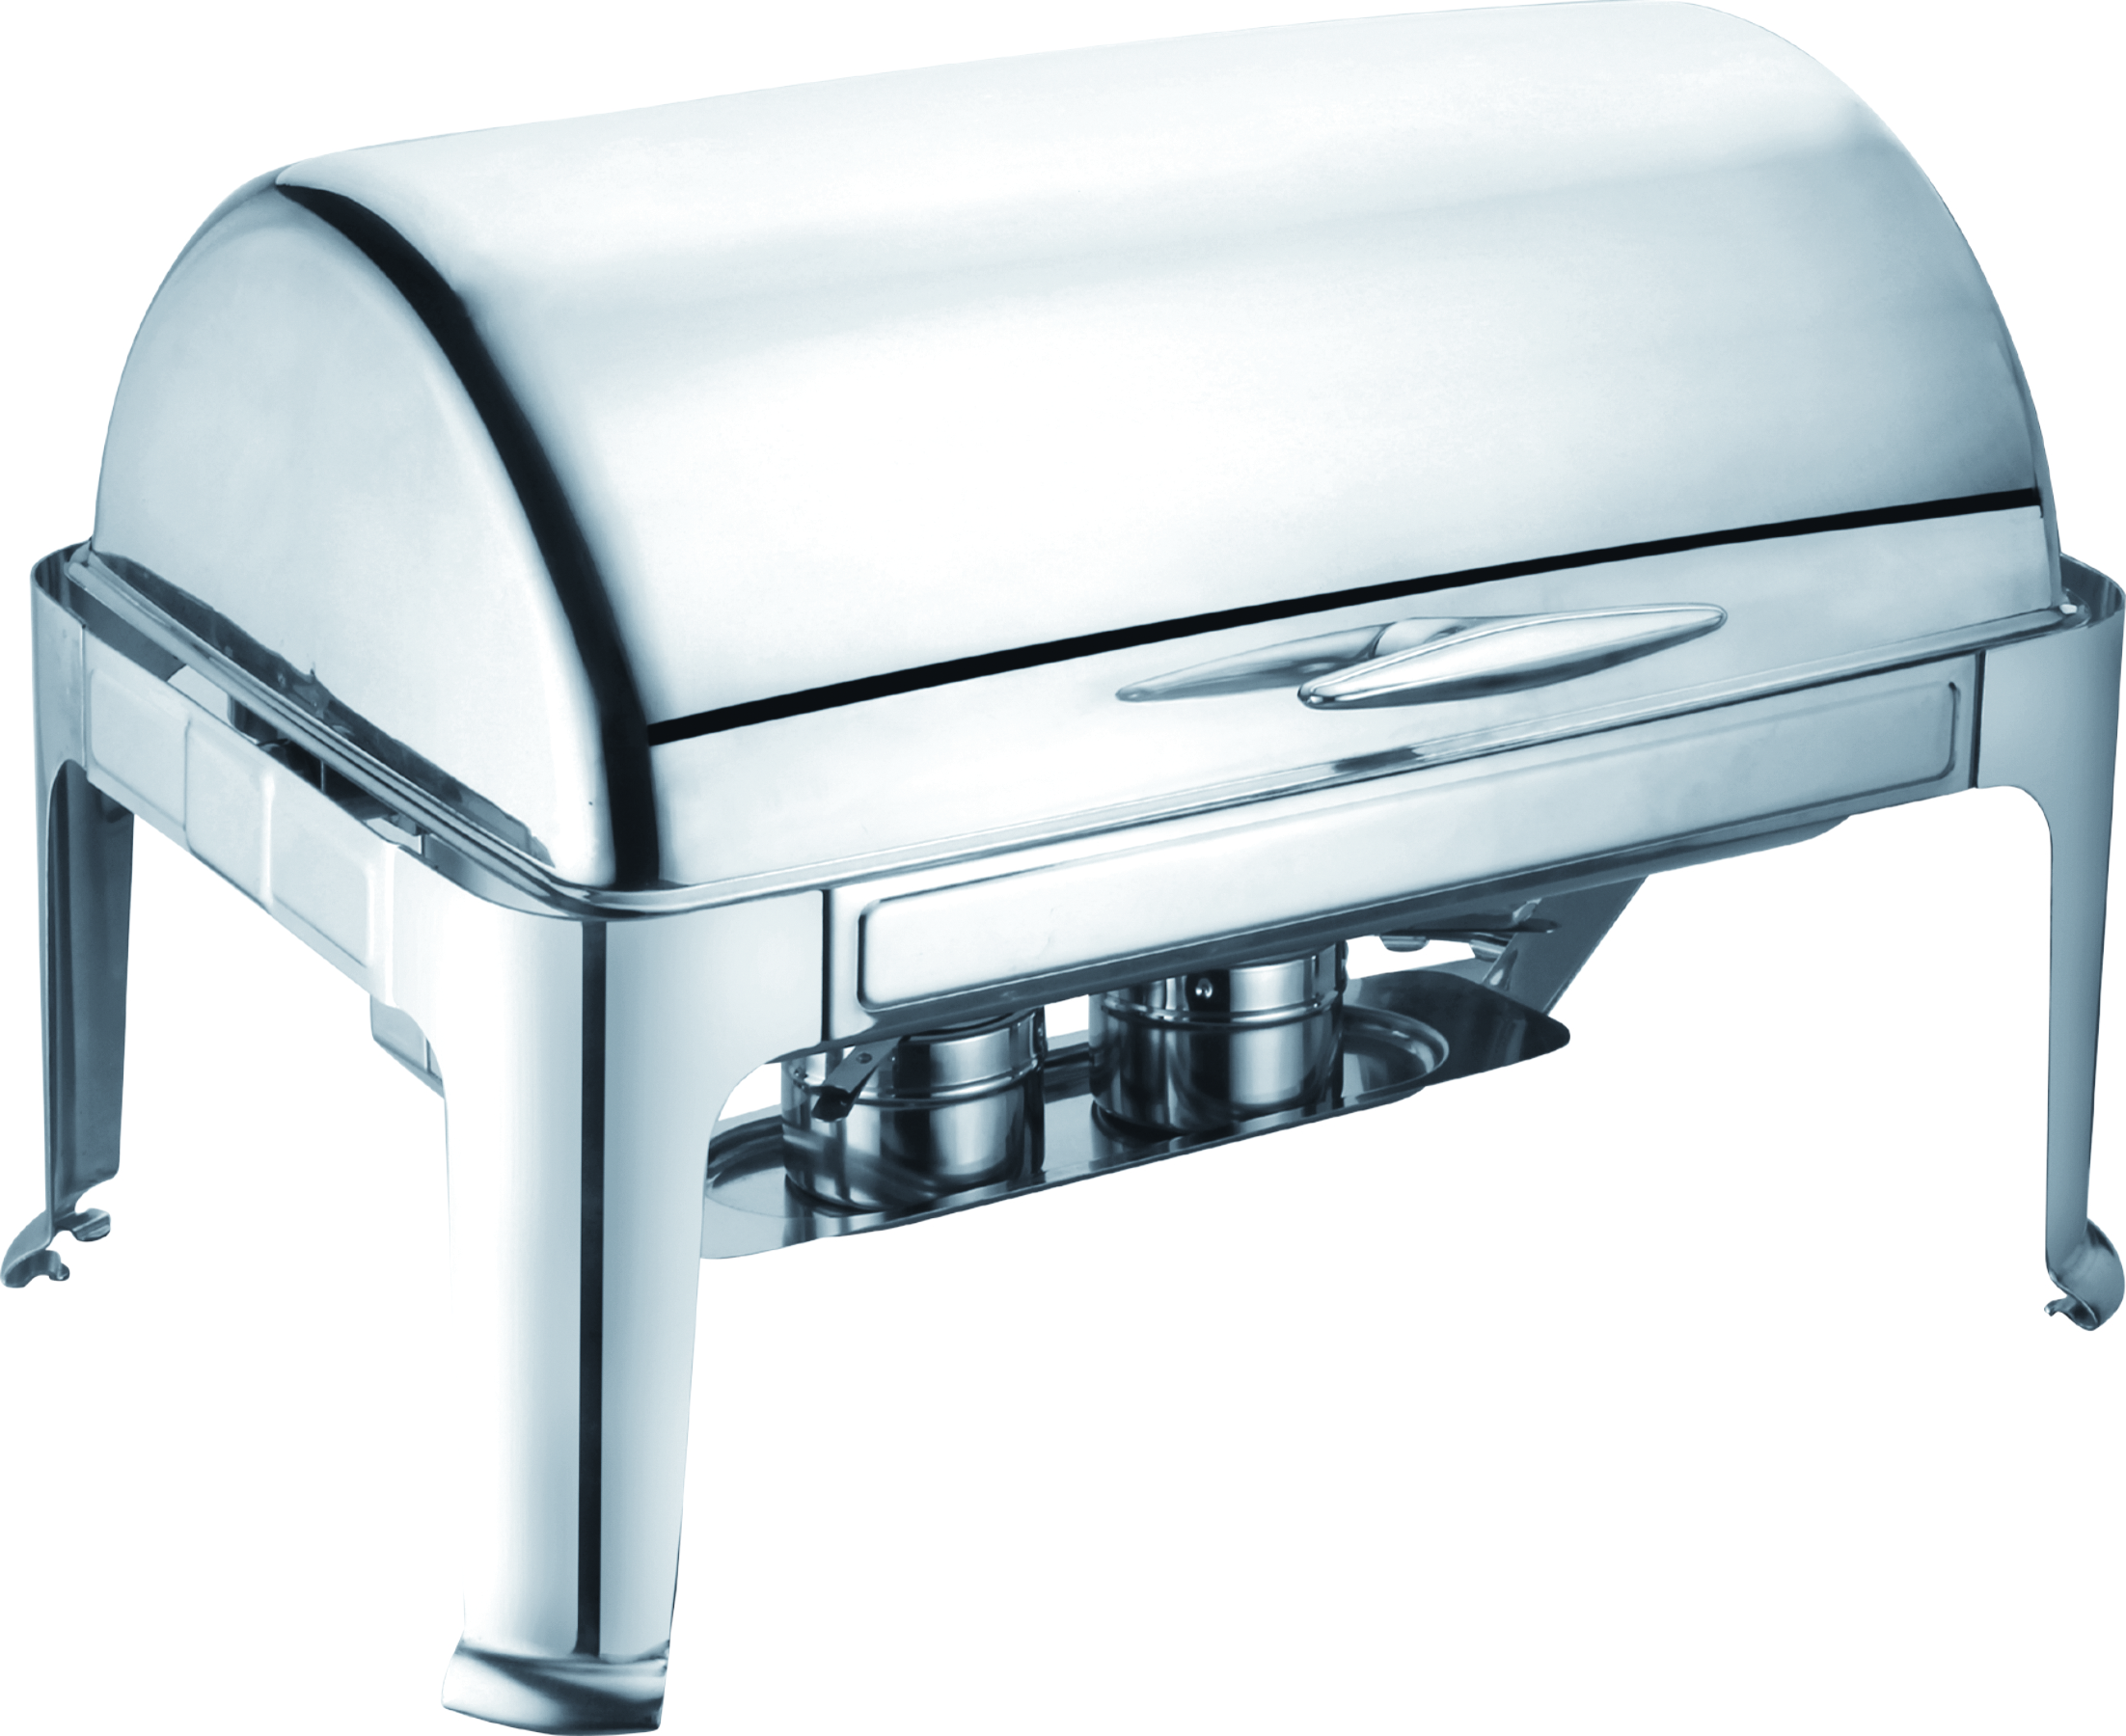 GRT-723 0.9mm Thick Stainless Steel Rectangular Chafing Dish 9L